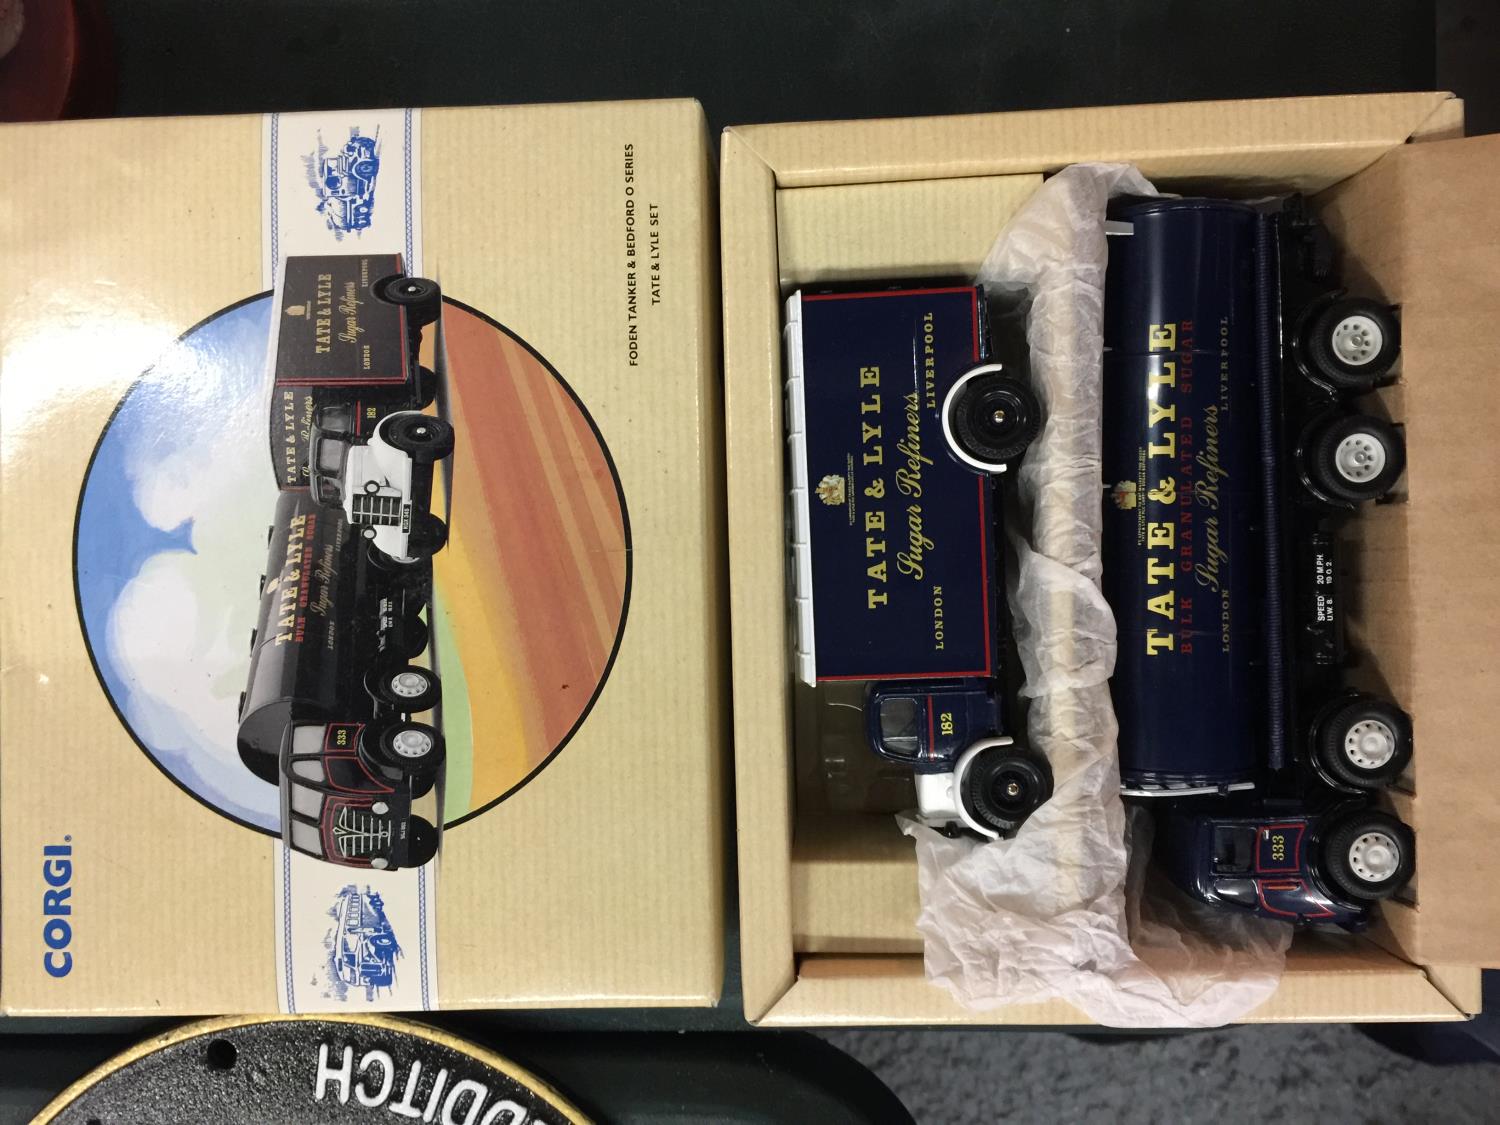 A BOXED LIMITED EDITION (9778) CORGI FODEN TANKER AND A BEDFORD O -TATE & LYLE SET